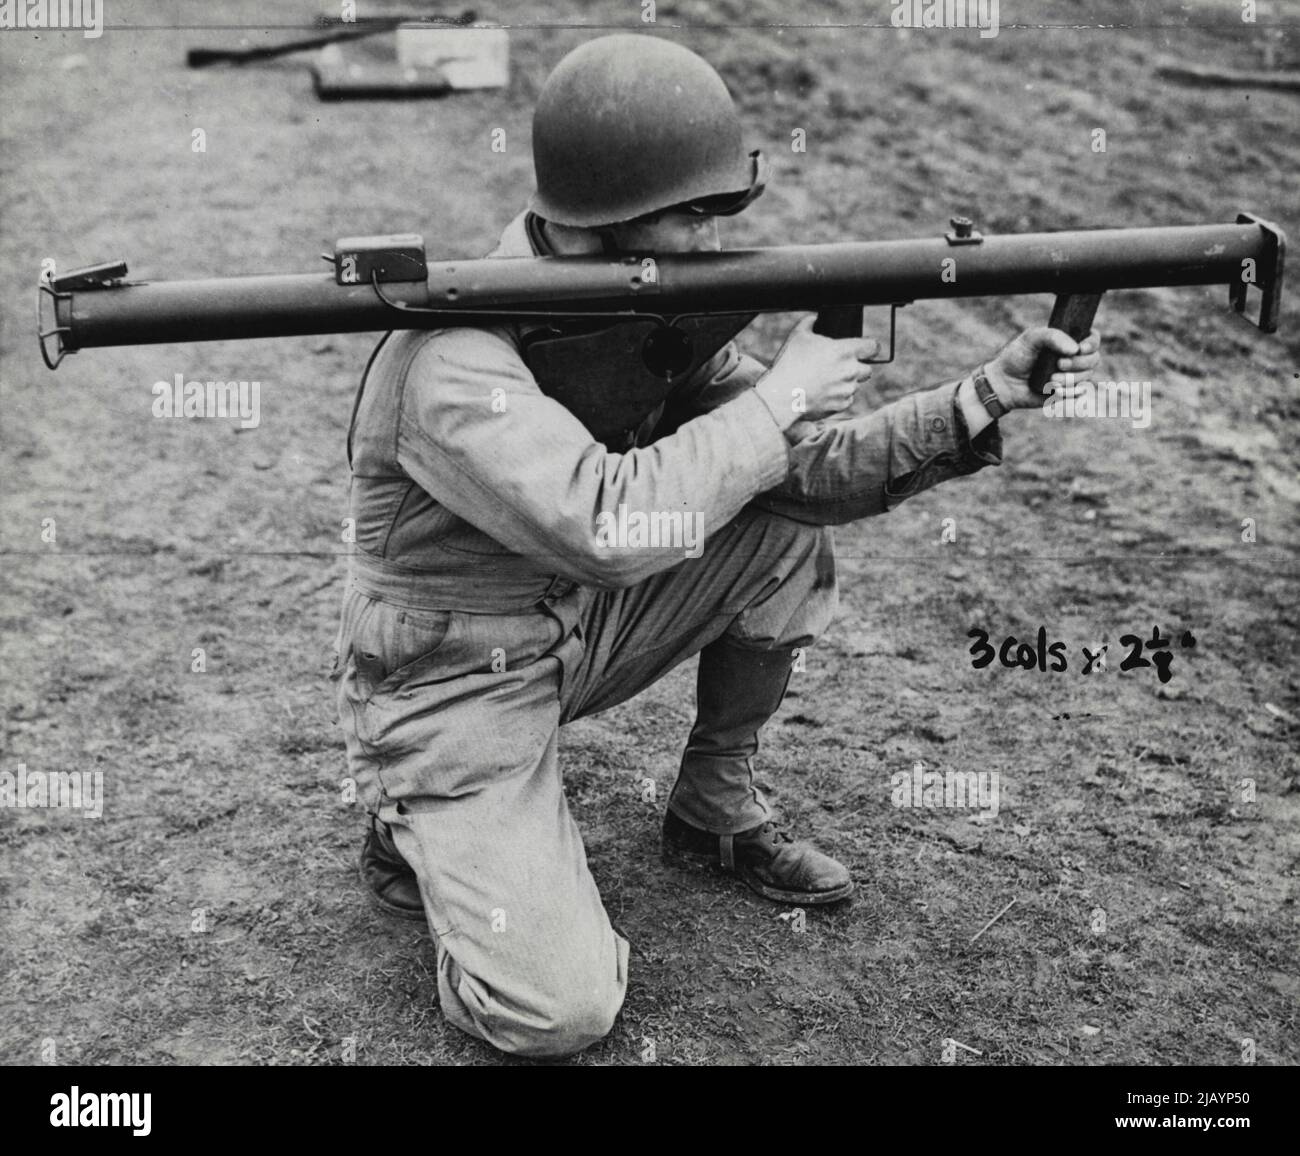 The Armor-Piercing 'Bazooka' -- Correct way to fire the gun. Operated in North Africa and Sicily with deadly effect against Nazi tanks. August 12, 1944. (Photo by The New York Times). Stock Photo